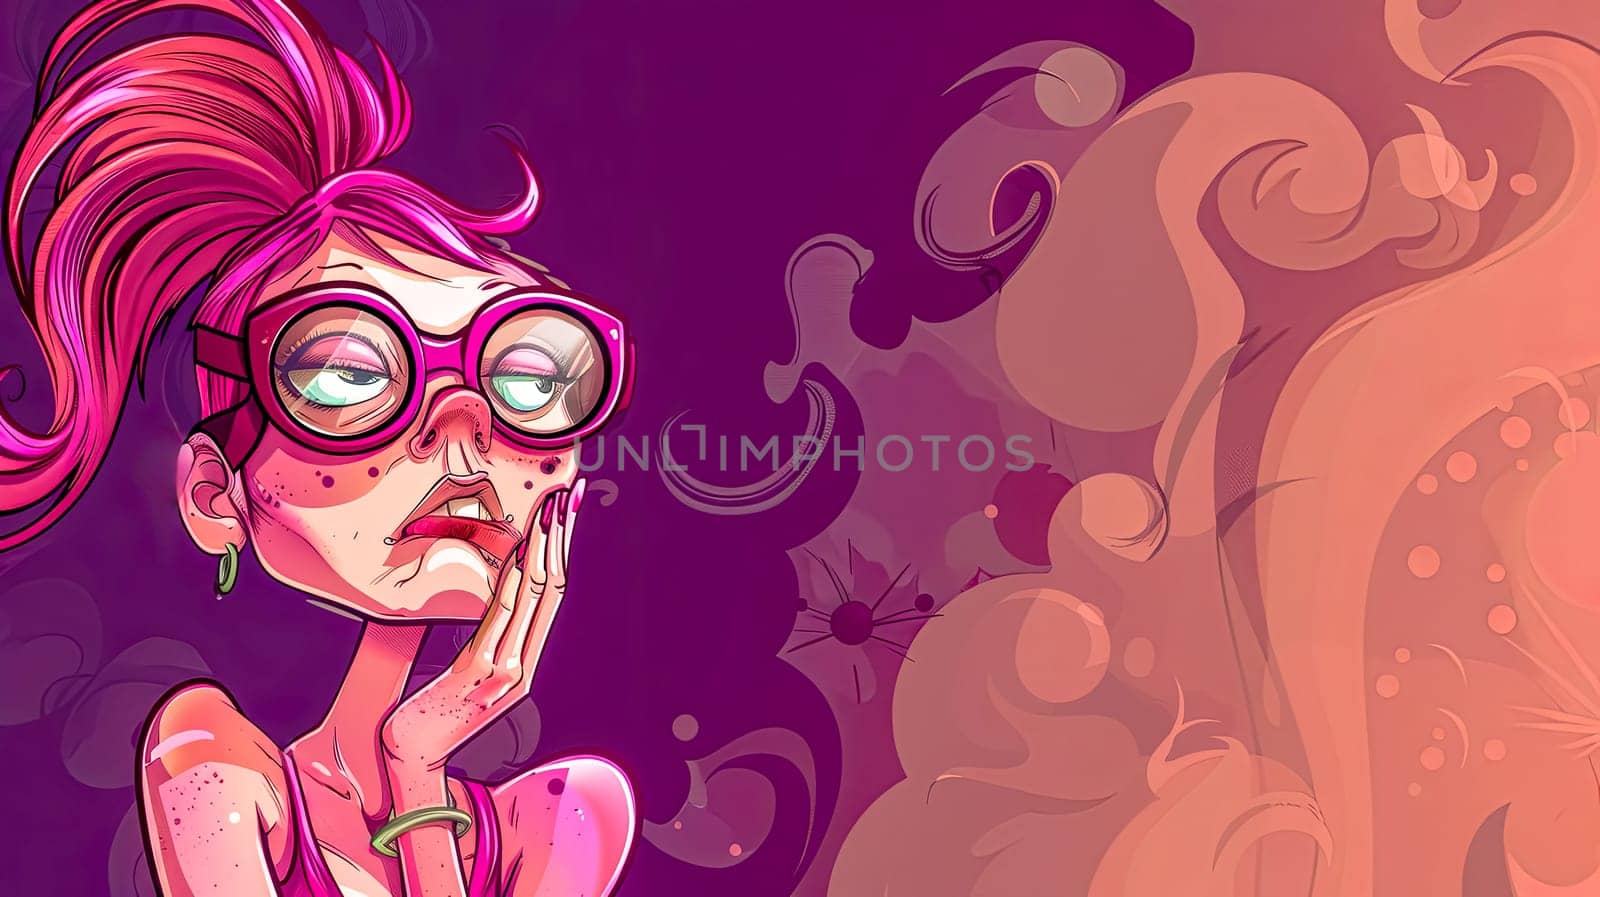 Illustration of a young female cartoon character with glasses, showing boredom on a vibrant purple background